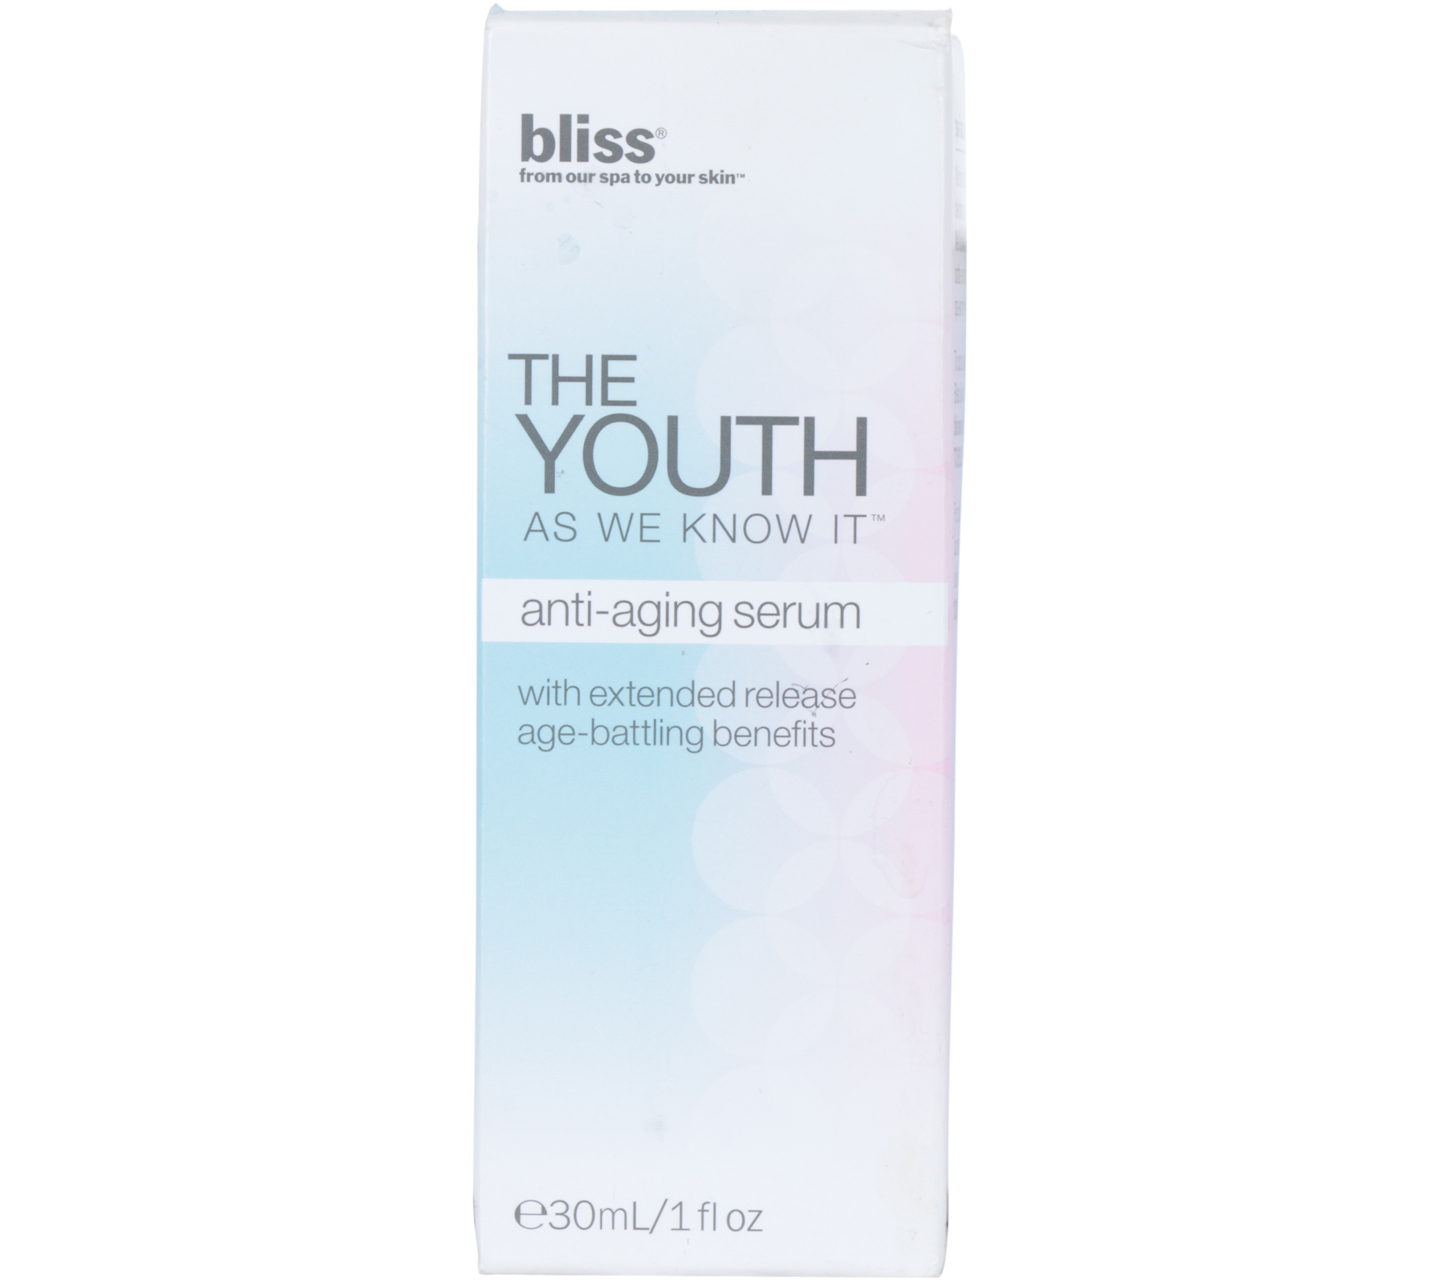 Bliss Multi Colour The Youth Anti Aging Serum Skin Care